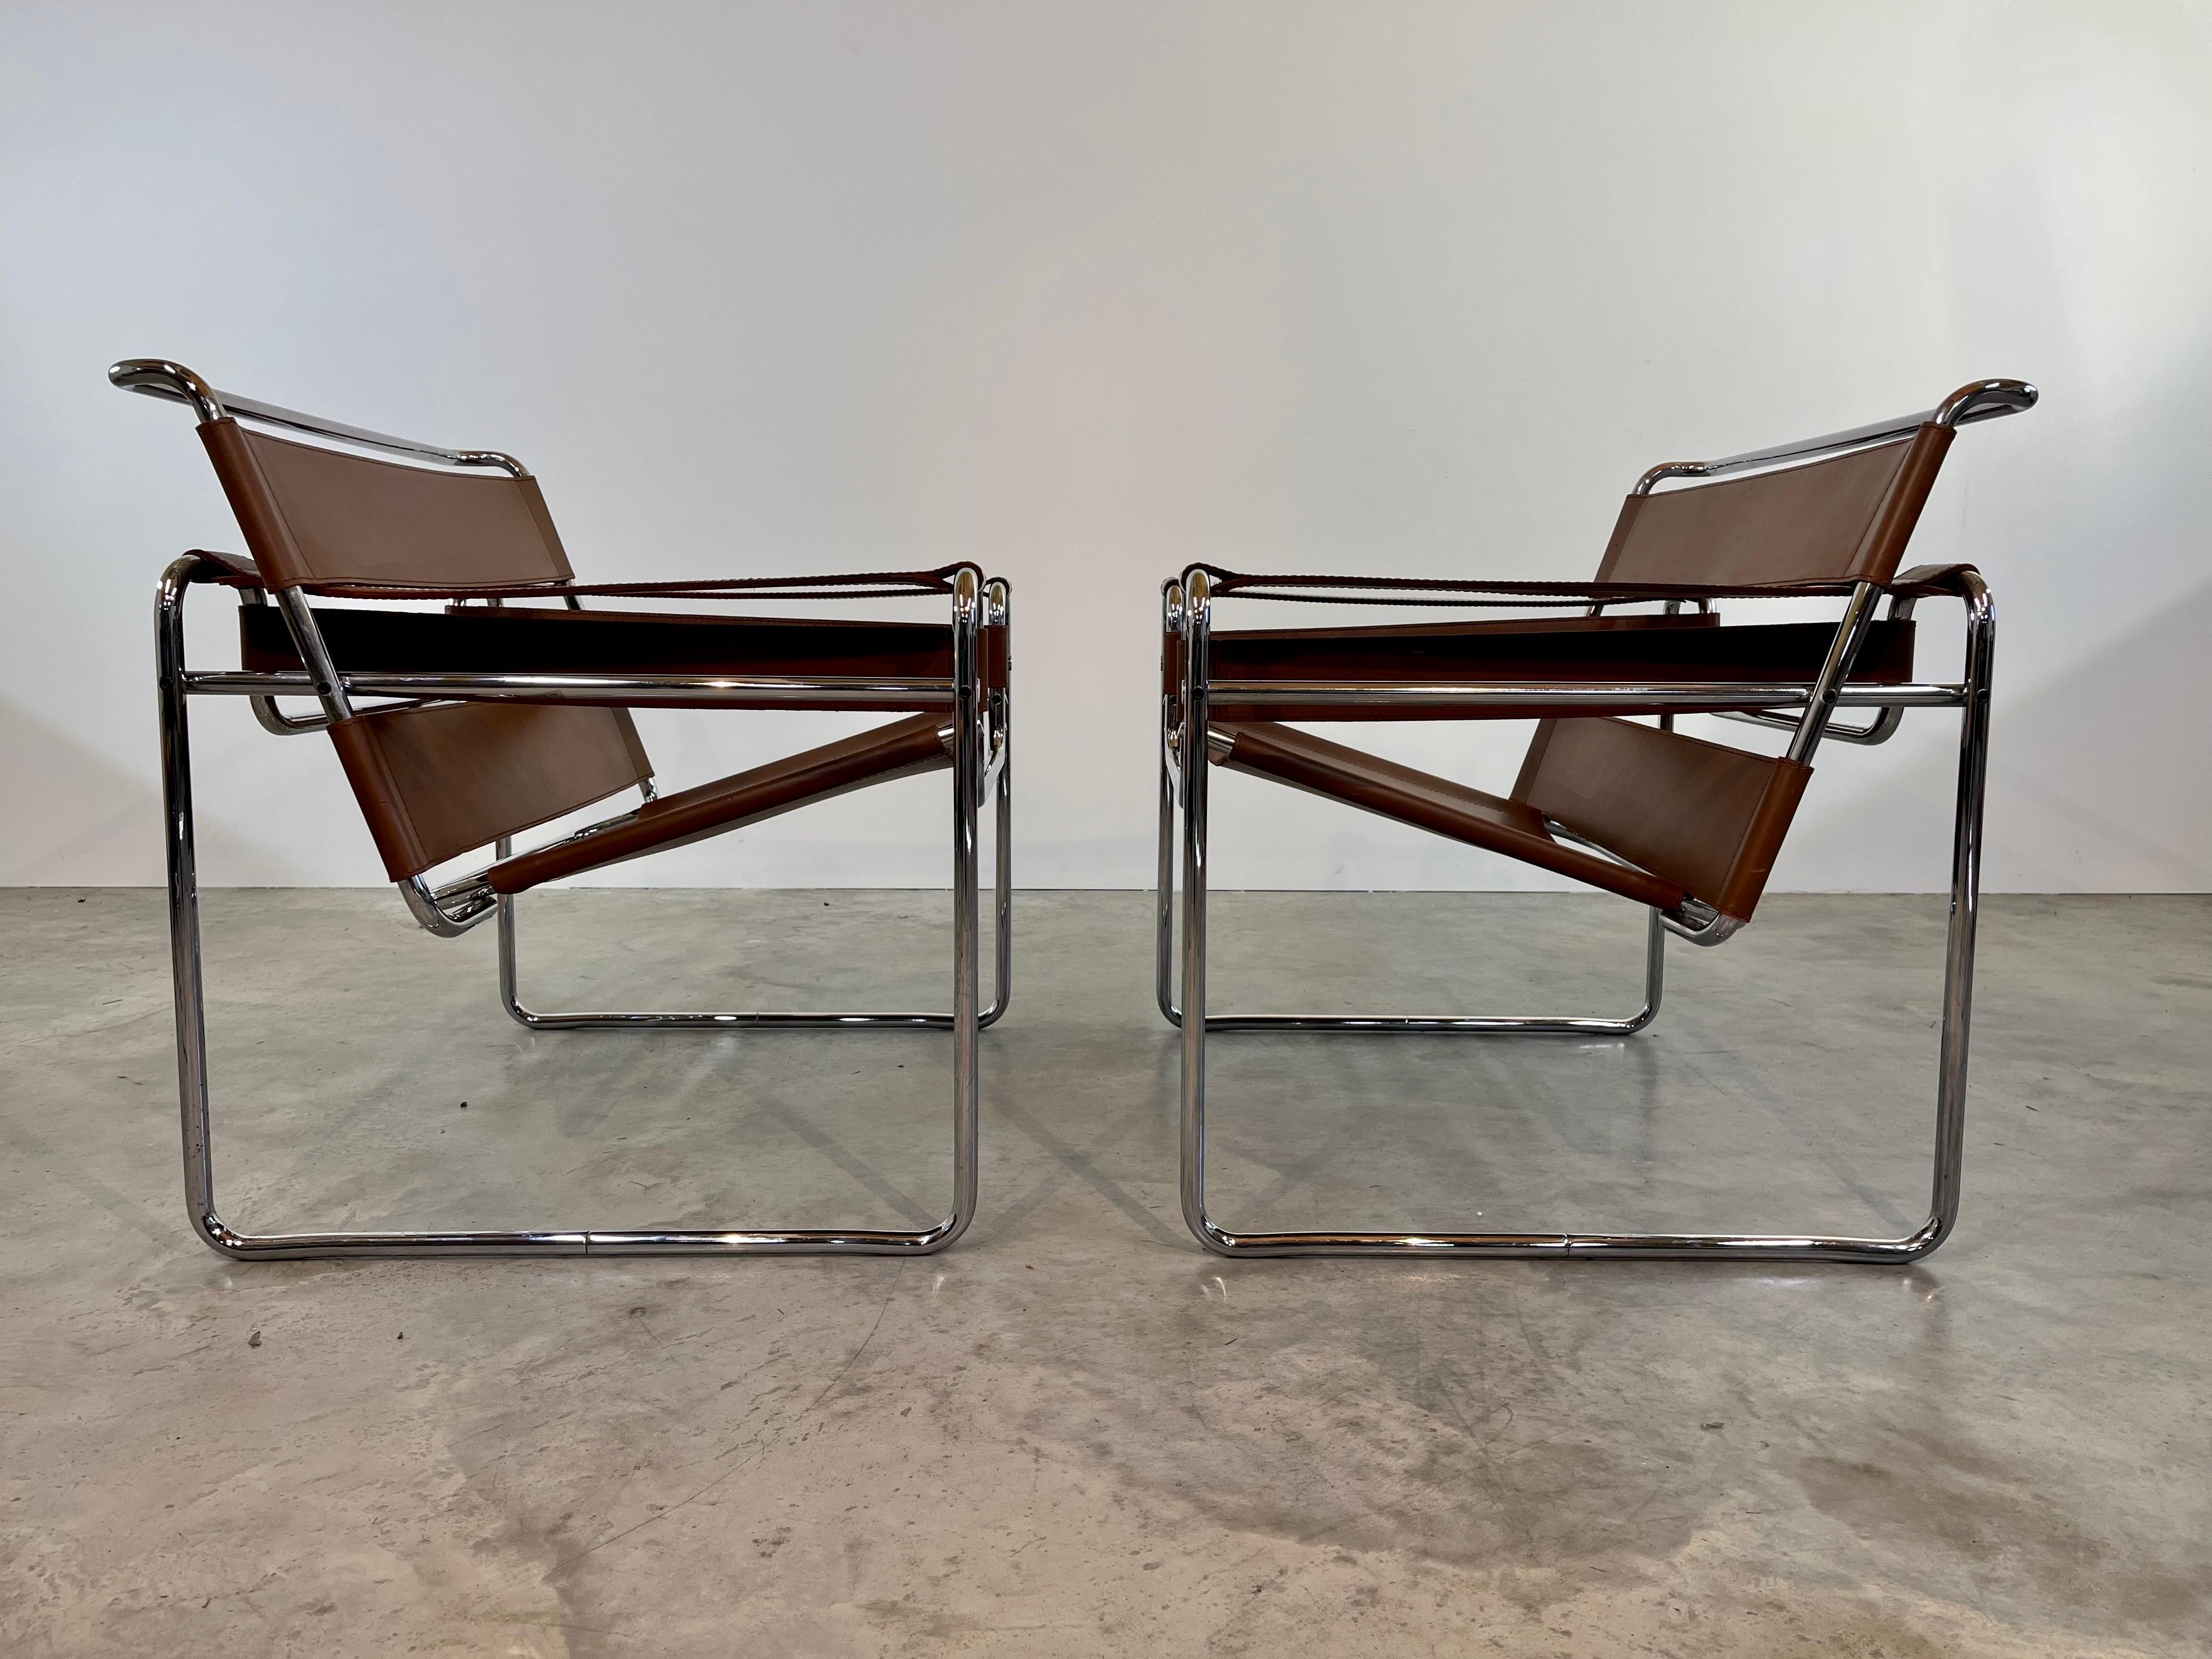 Italian Pair of Wassily Lounge Chairs In Chocolate Leather by Marcel Breuer For Knoll